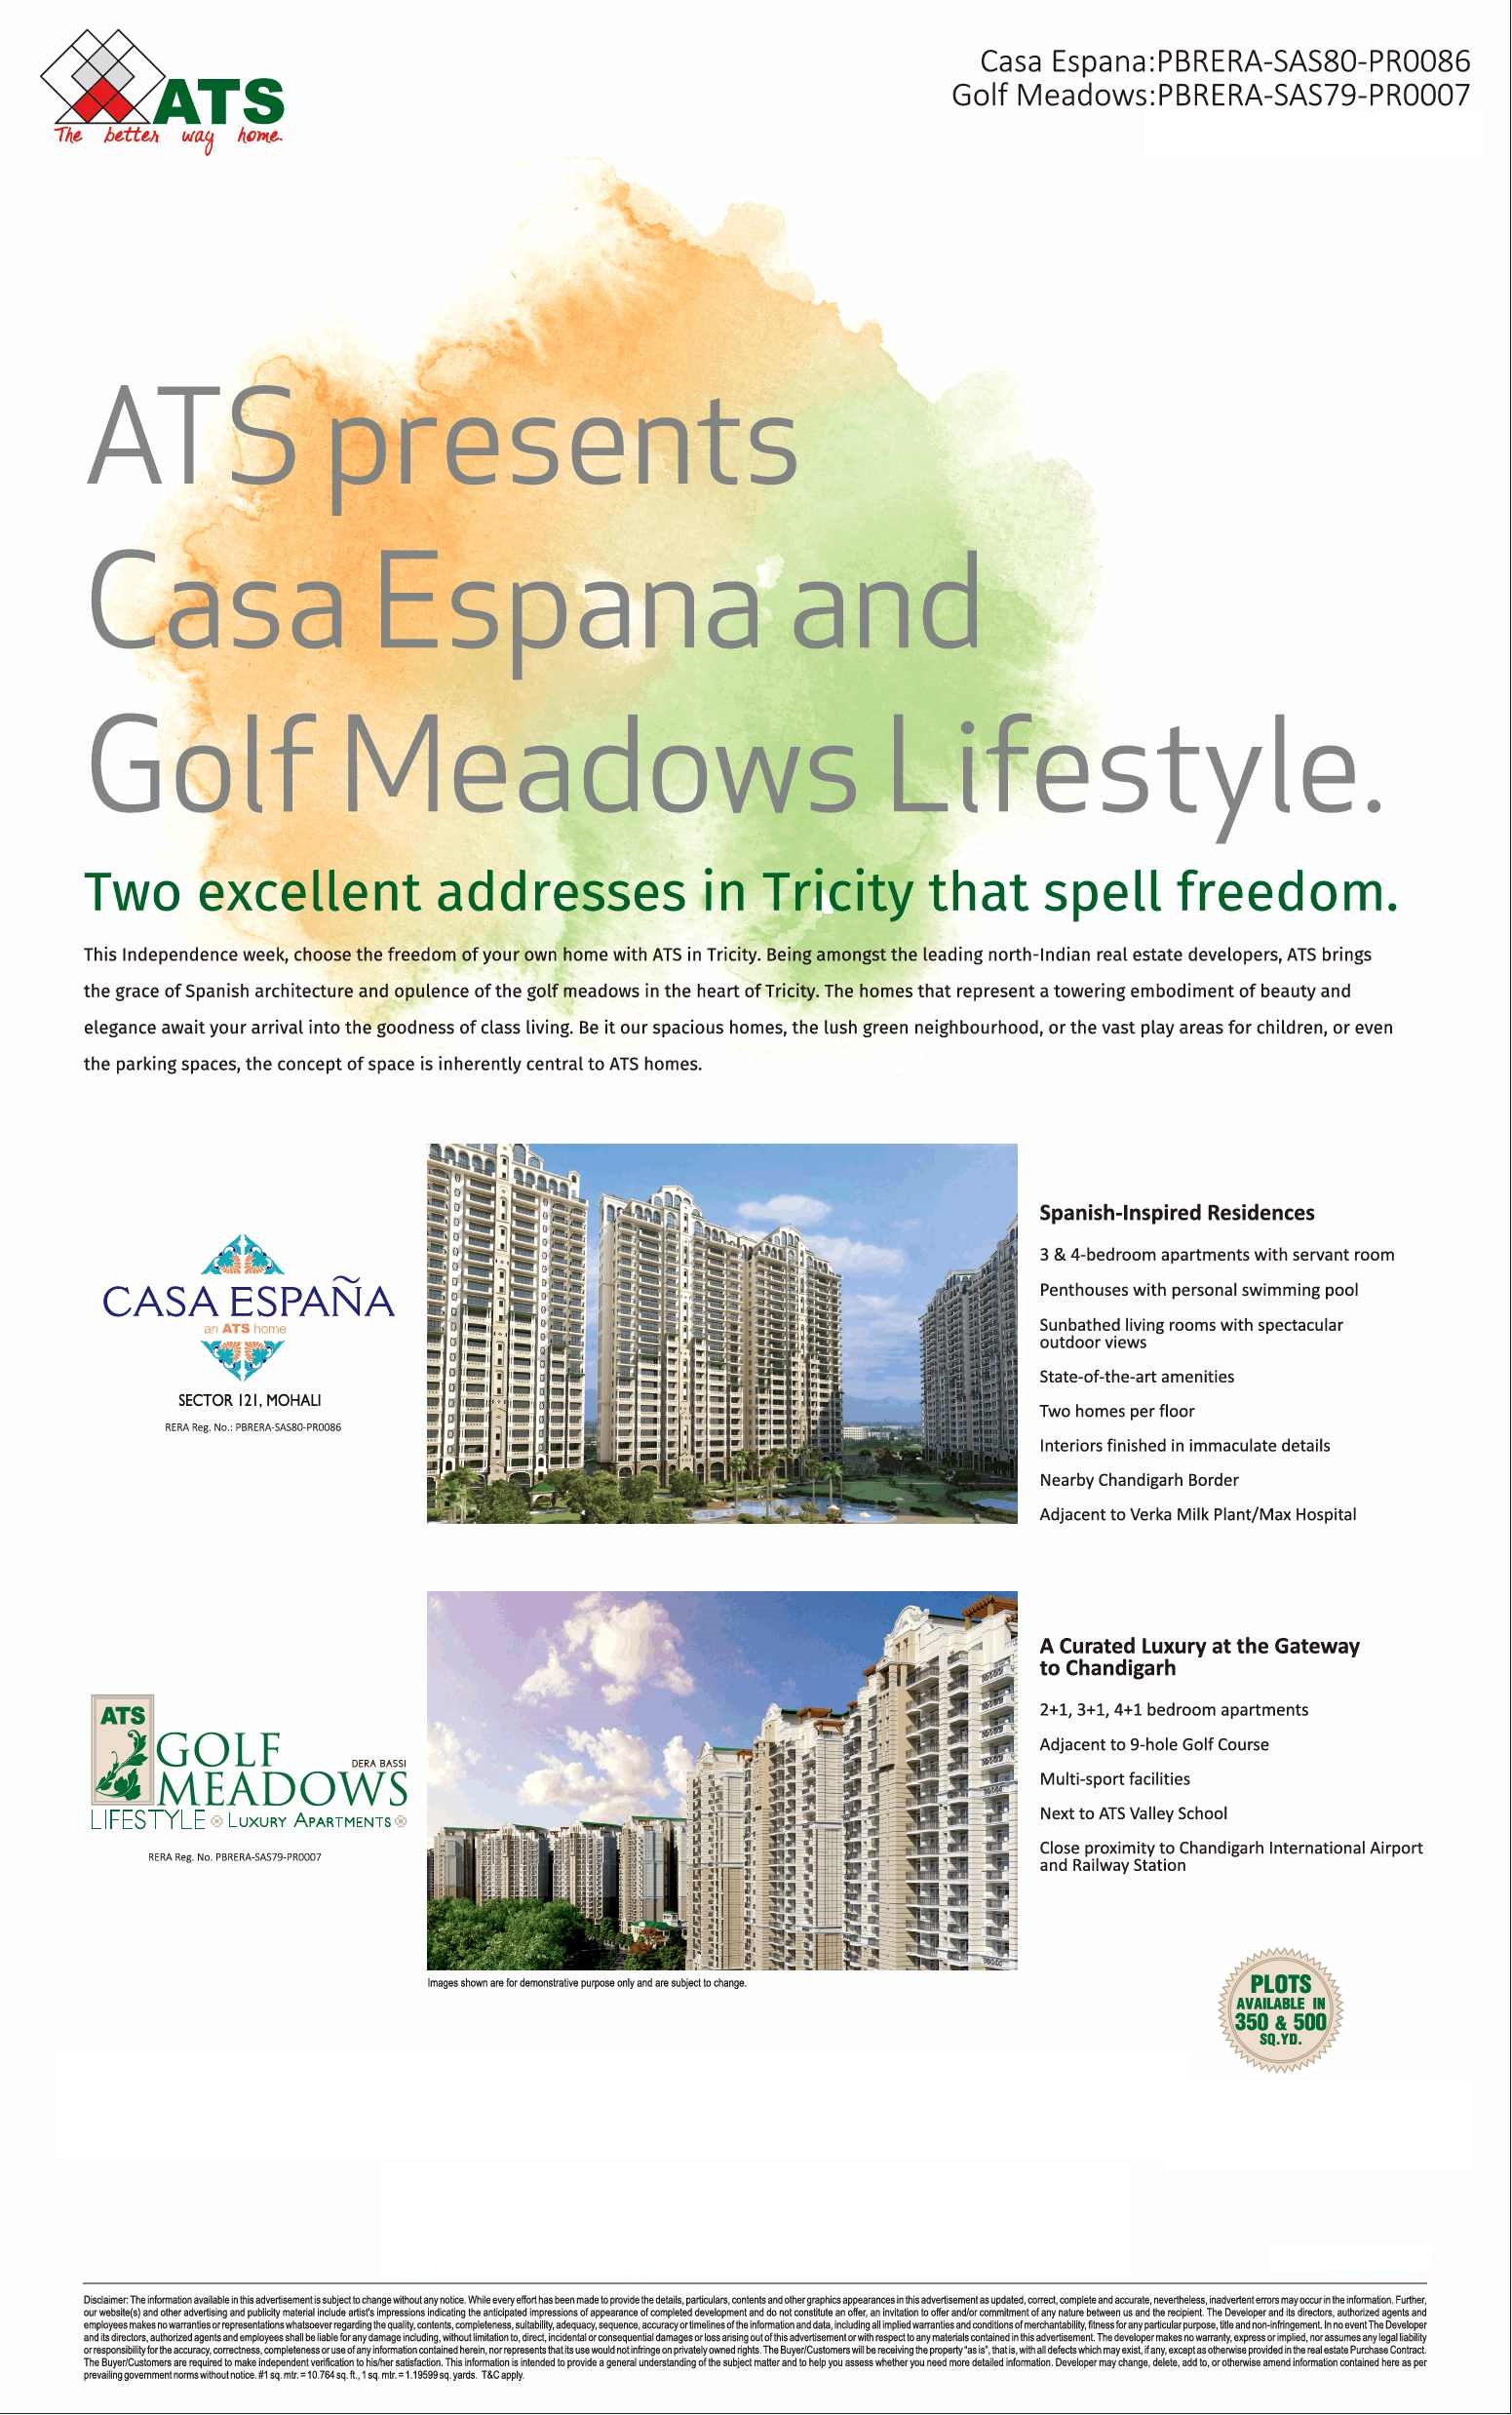 ATS presents Casa Espana & Golf Meadows in Tricity that spell freedom in Chandigarh